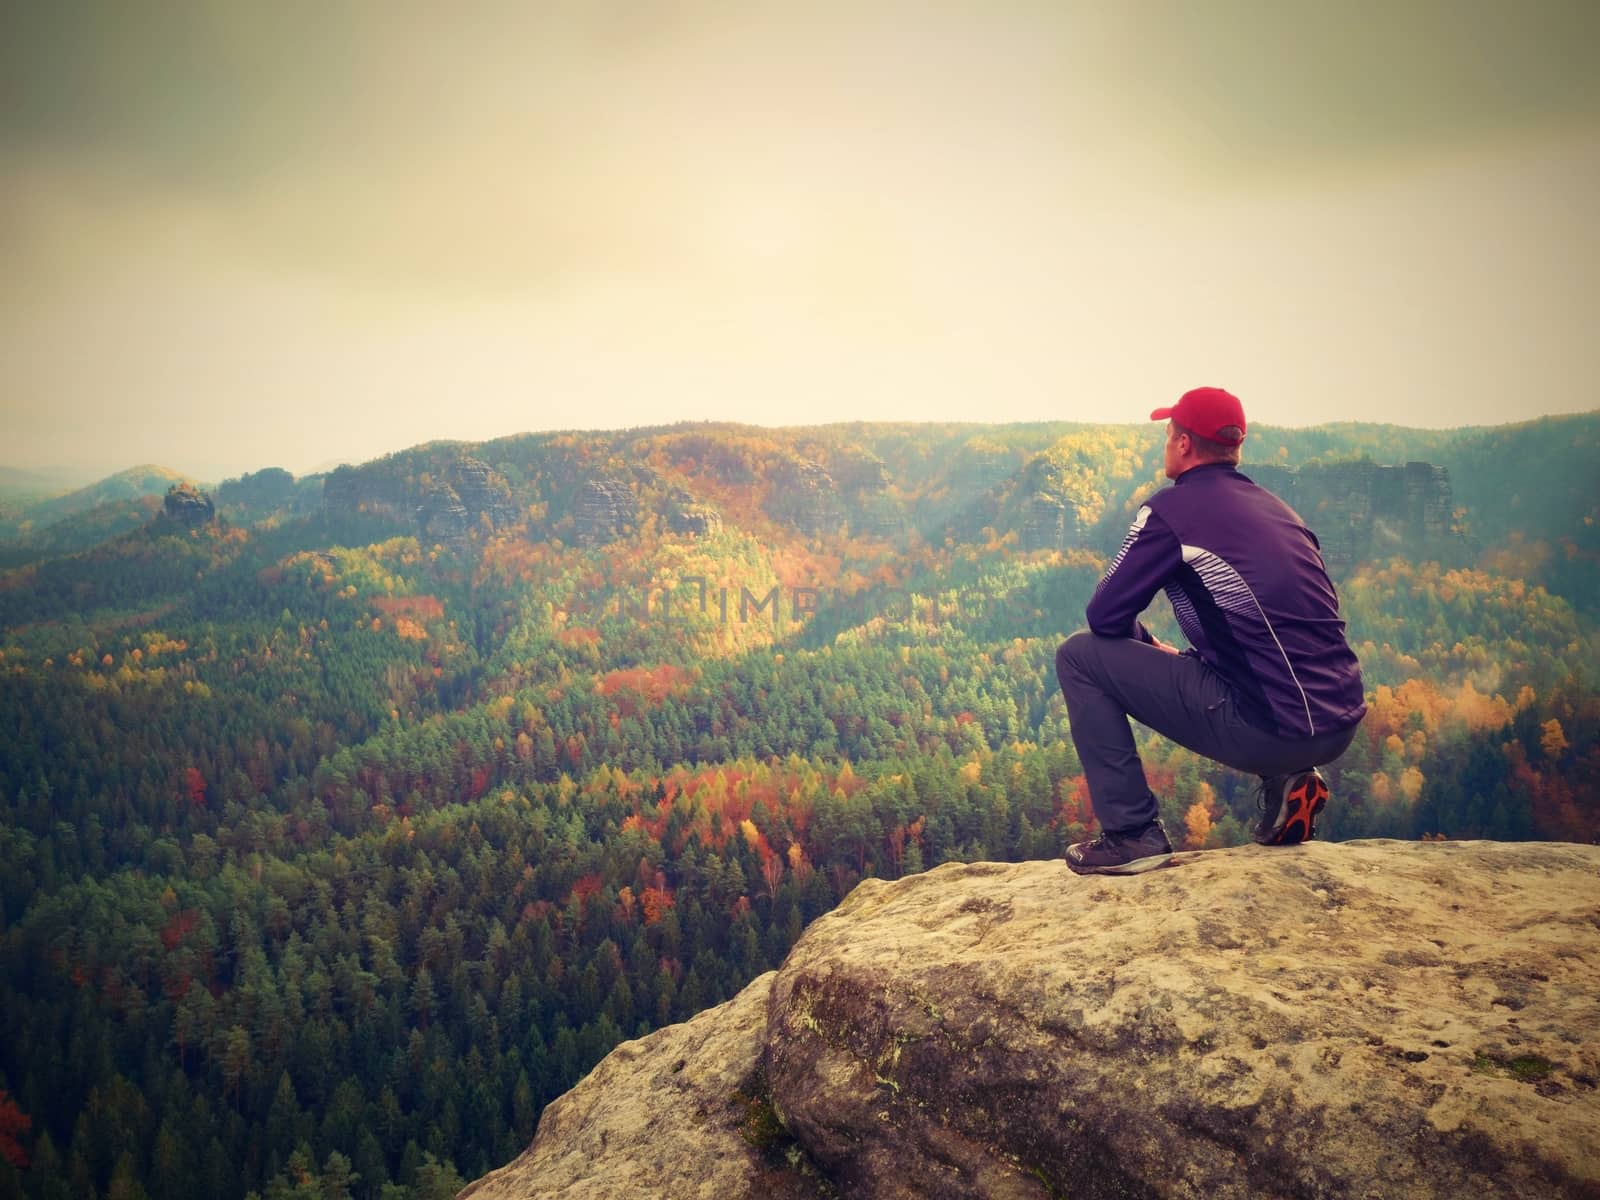 Moment of loneliness. Man in black enjoy marvelous view. Hiker sit on the peak of rock and watching into colorful mist and fog in forest valley.